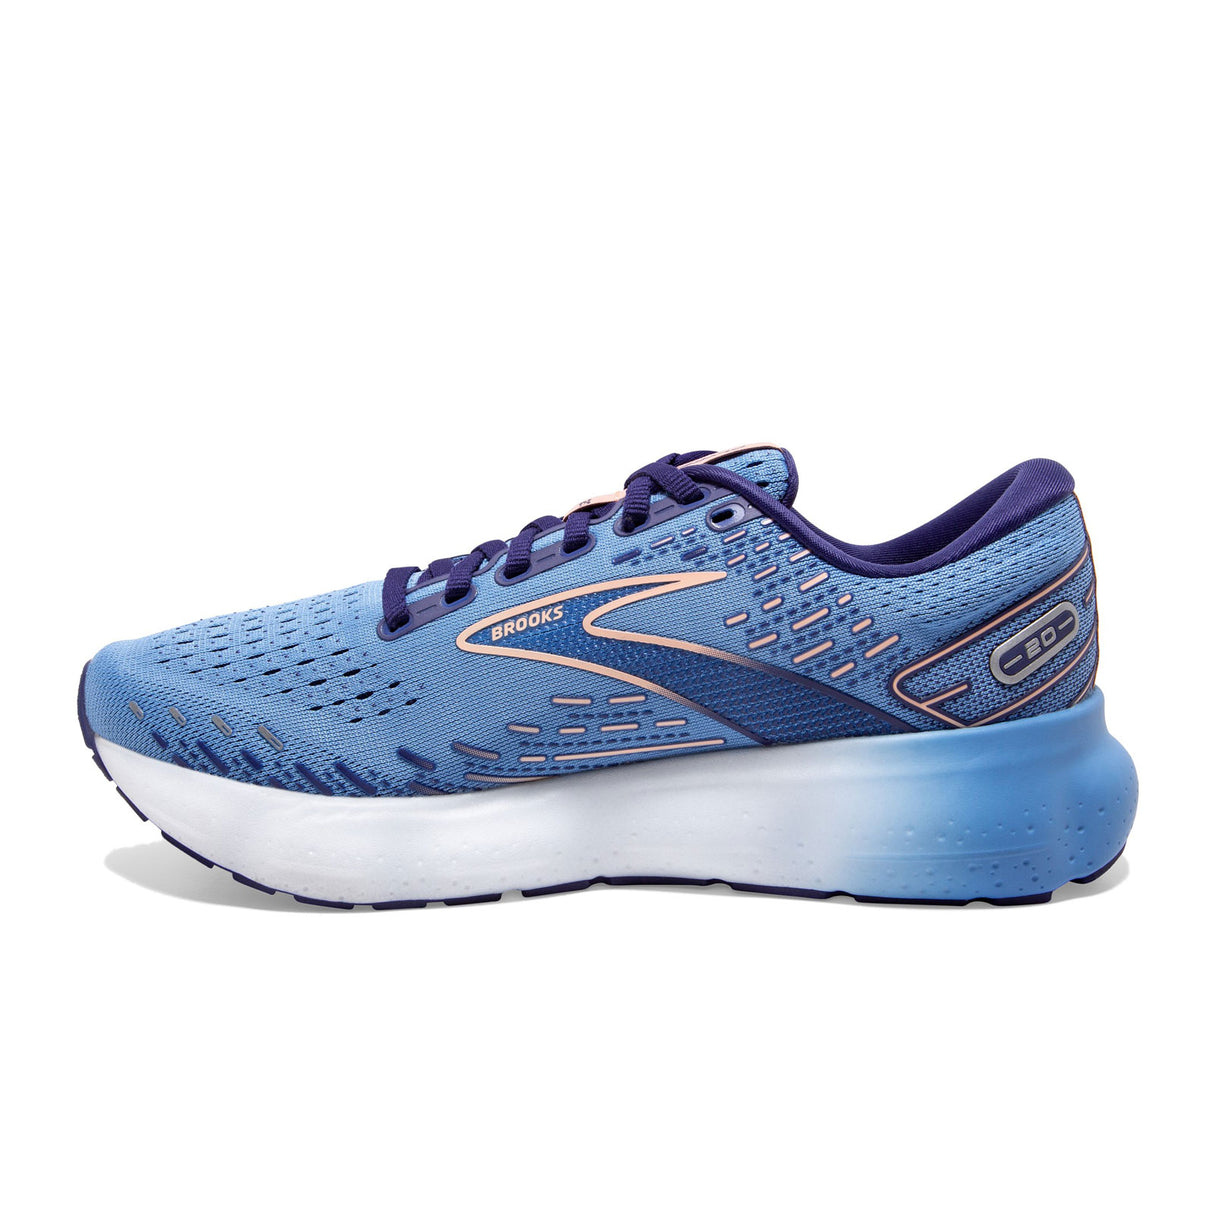 Brooks Glycerin 20 Running Shoe (Women) - Blissful Blue/Peach/White Athletic - Running - Stability - The Heel Shoe Fitters